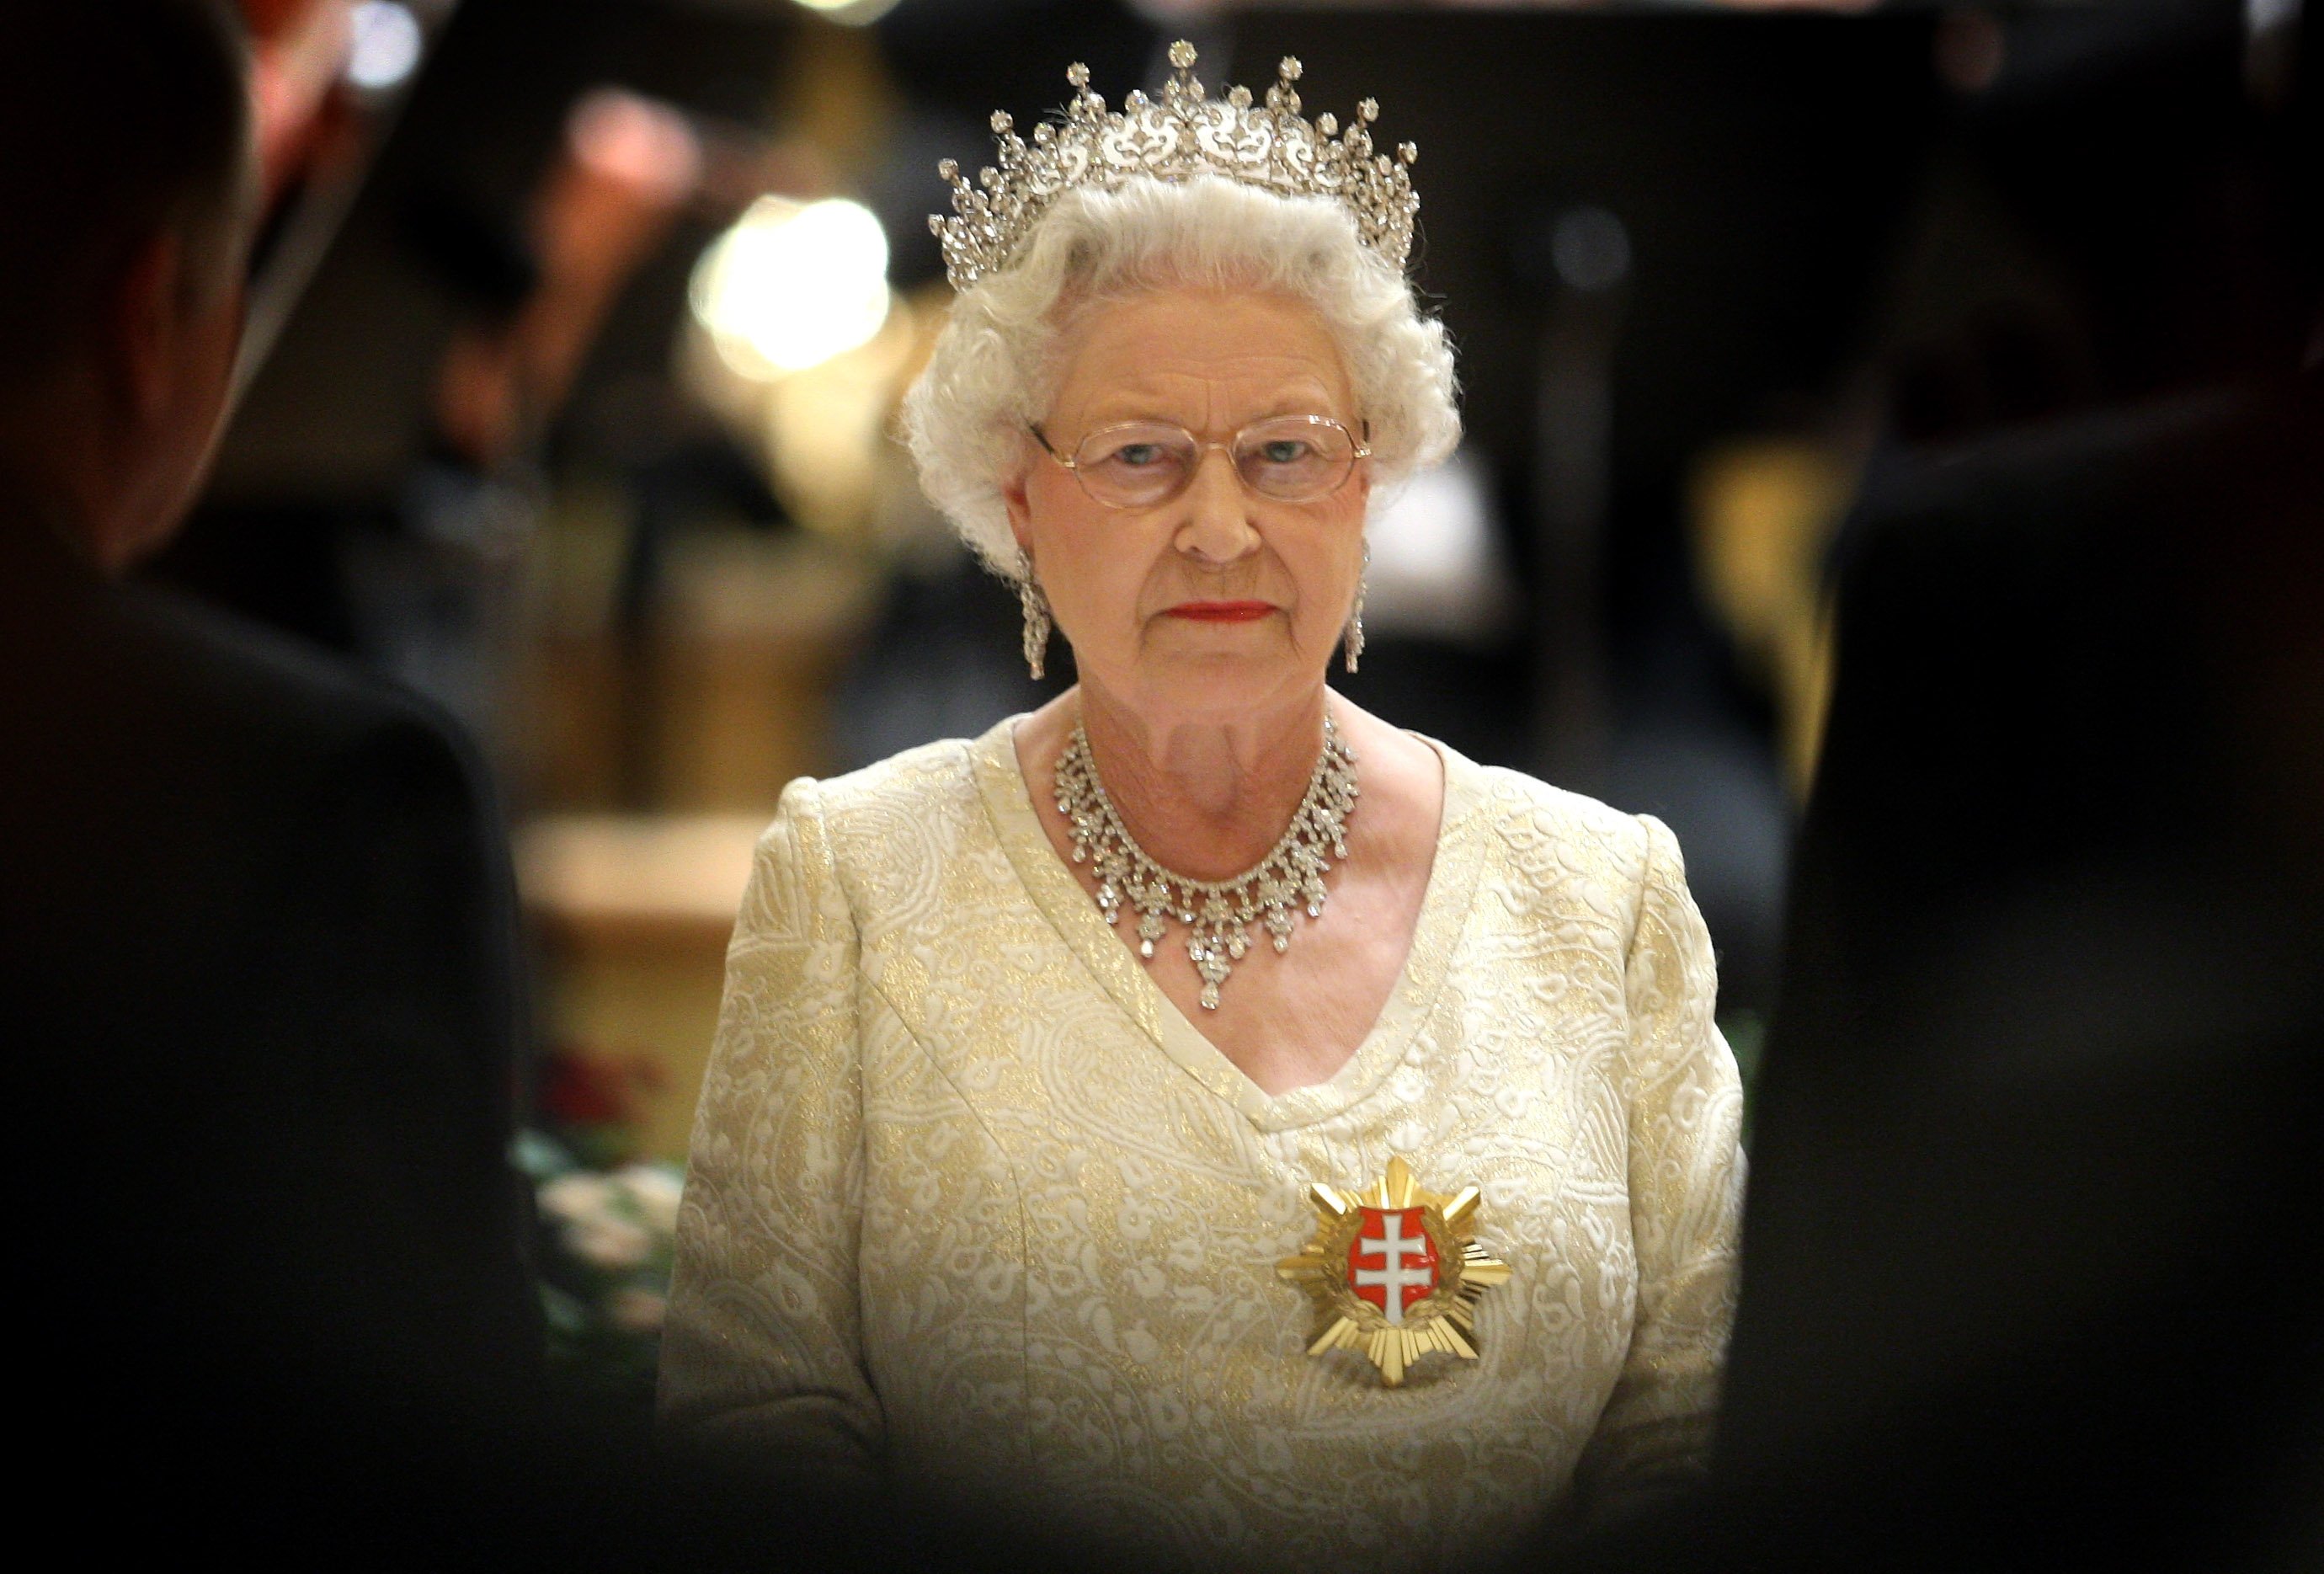 Queen Elizabeth II pictured at a State Banquet at the Philharmonic Hall on the first day of a tour of Slovakia, 2008, Bratislava, Slovakia. | Photo: Getty Images